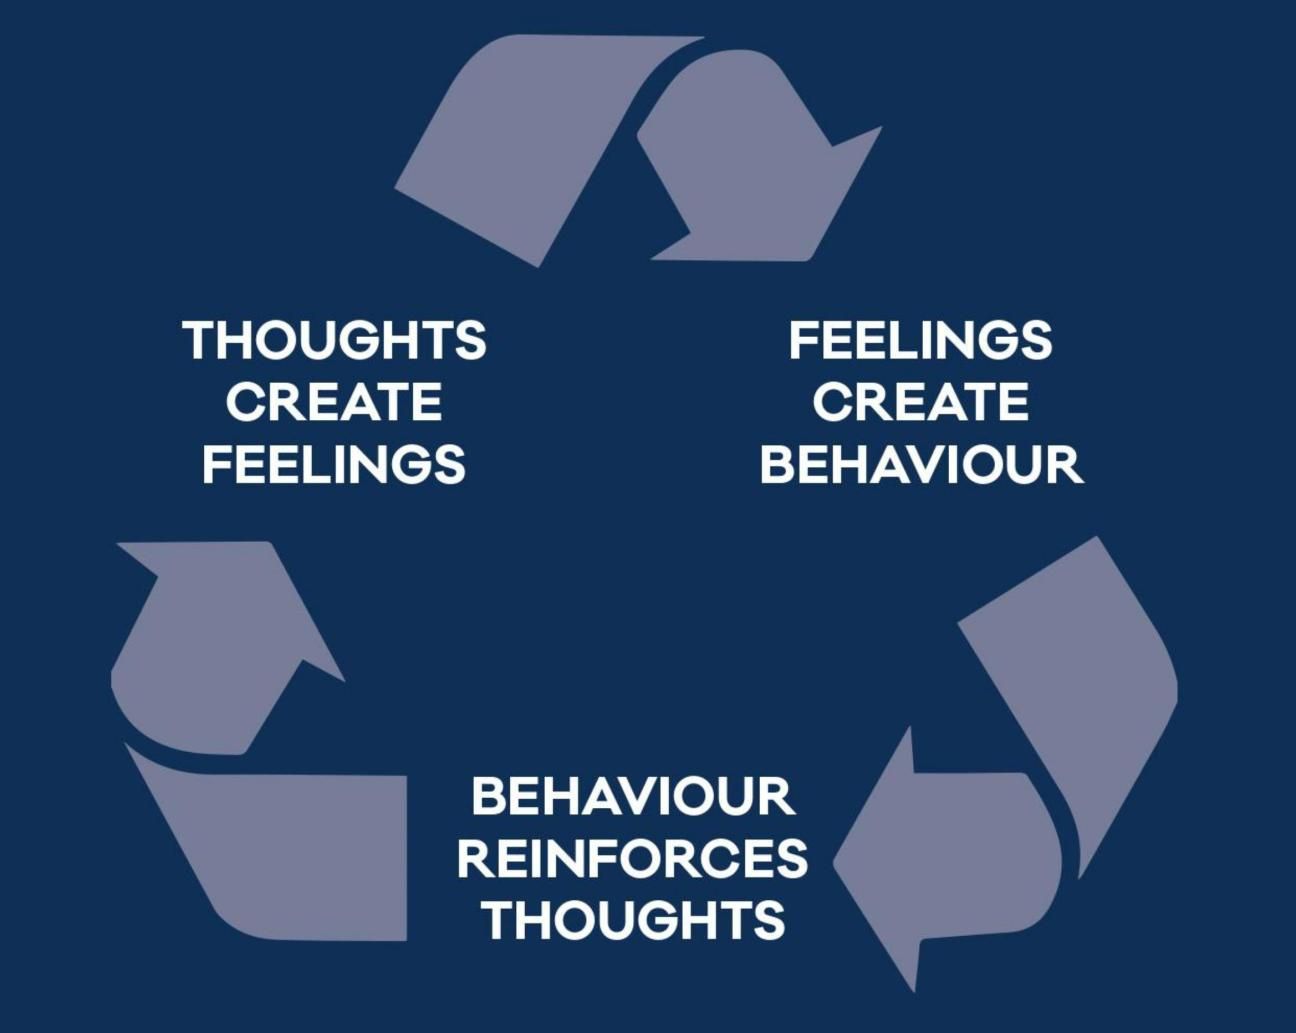 Graphic showing the cycle between feelings affecting behaviour, which in turn affect your feelings